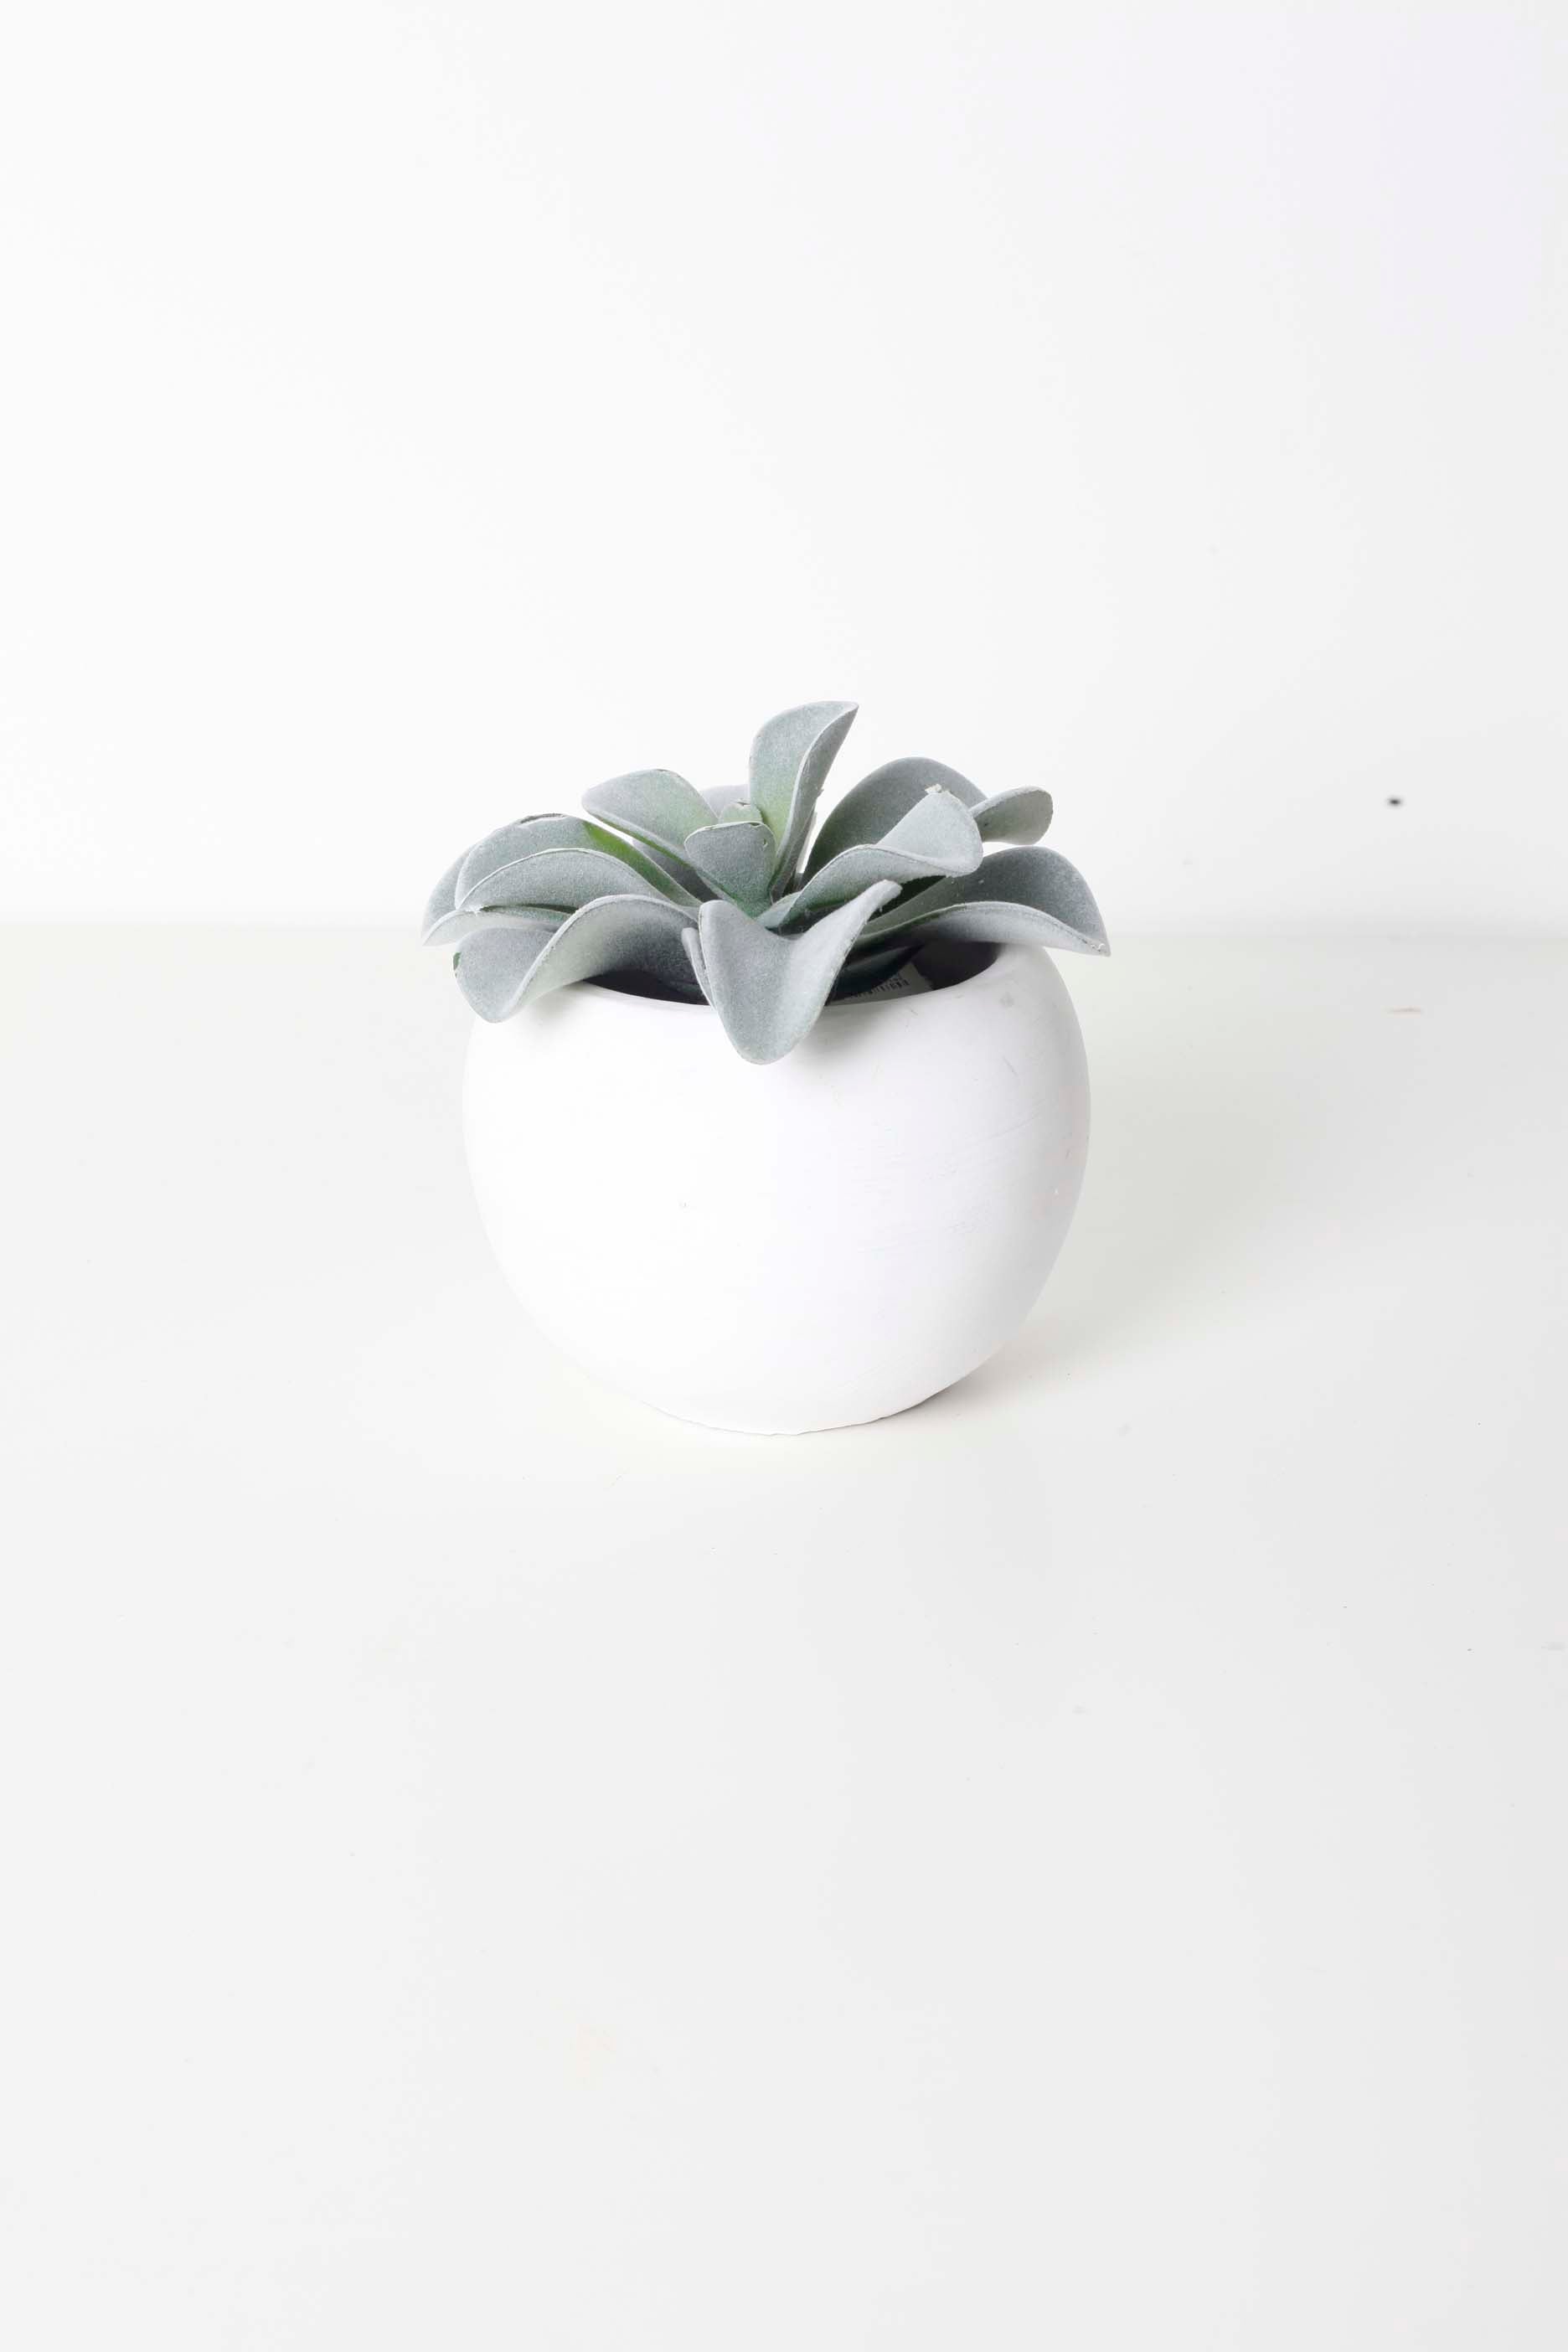 Small Faux Potted Succulent